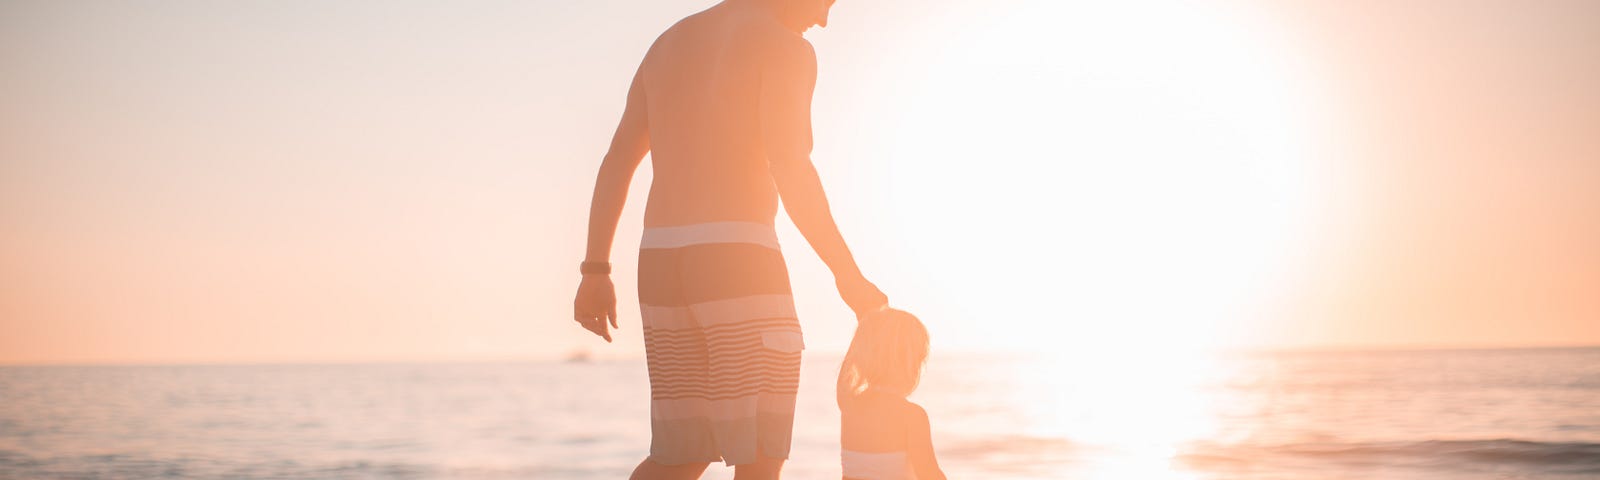 A man in swimming shorts walks hand-in-hand with a small child on a beach with a sunset in the background